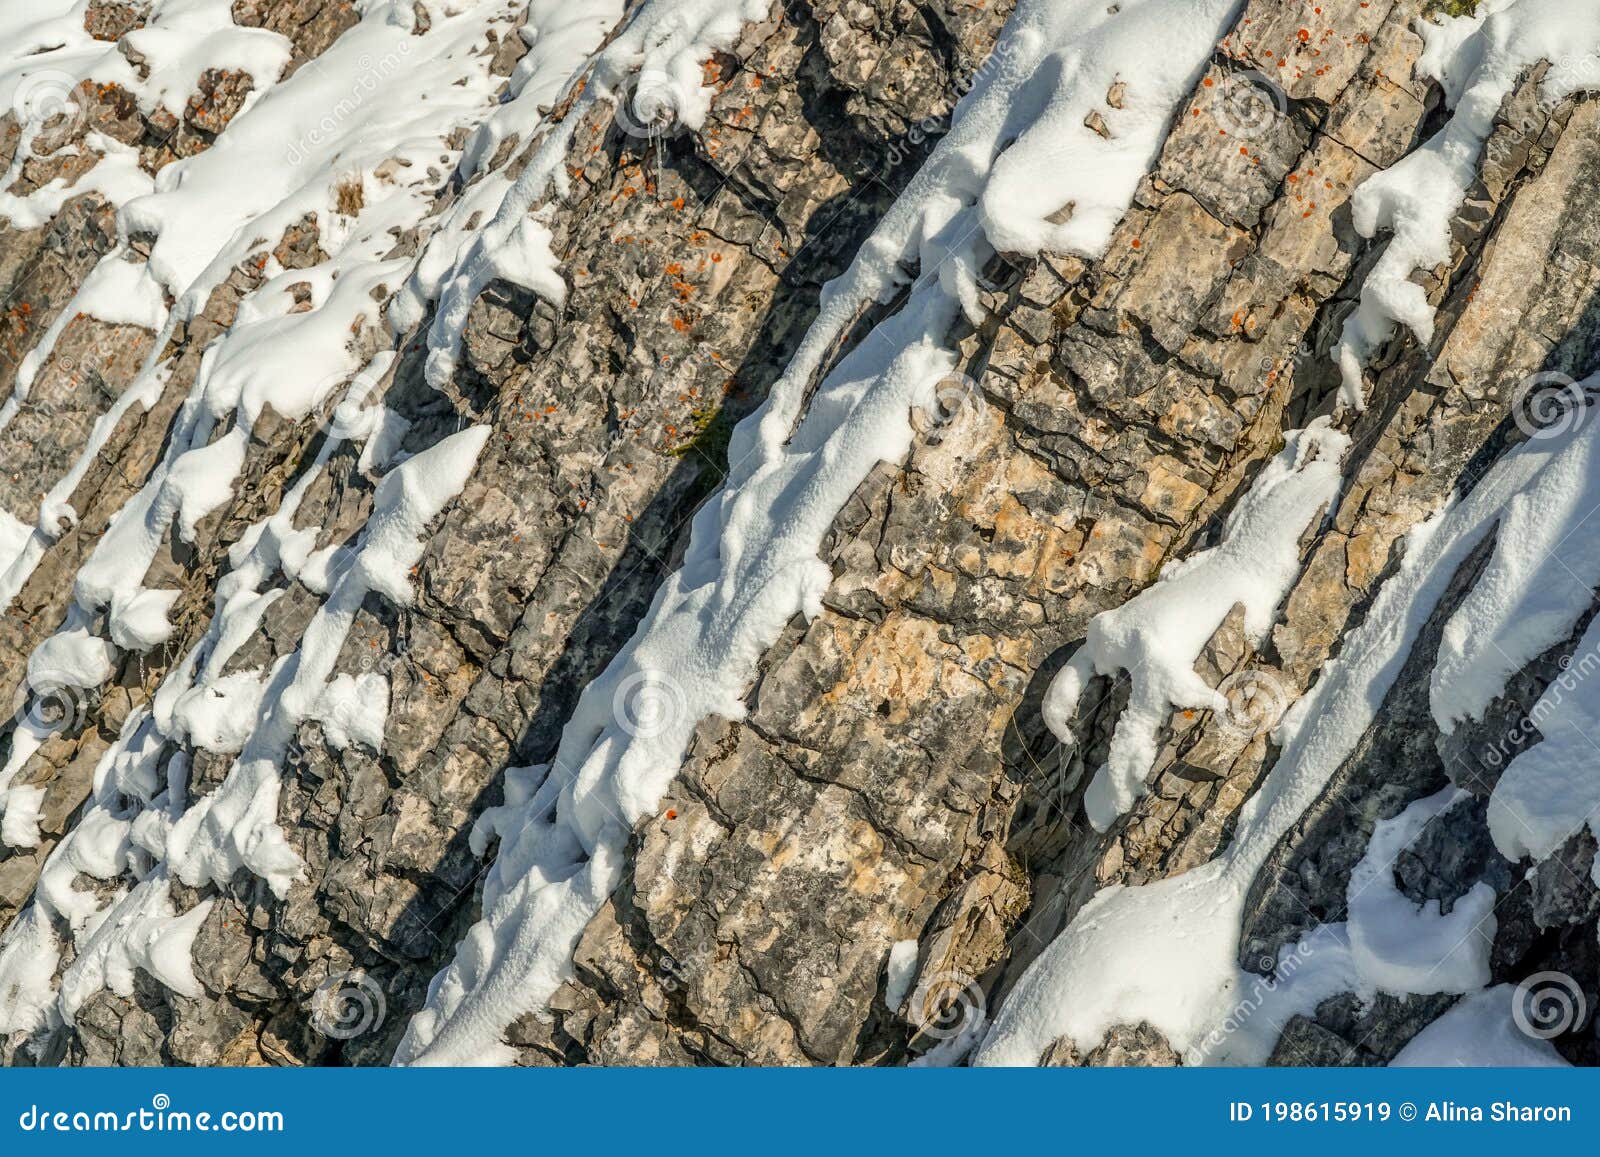 1 907 Rocky Snow Texture Photos Free Royalty Free Stock Photos From Dreamstime